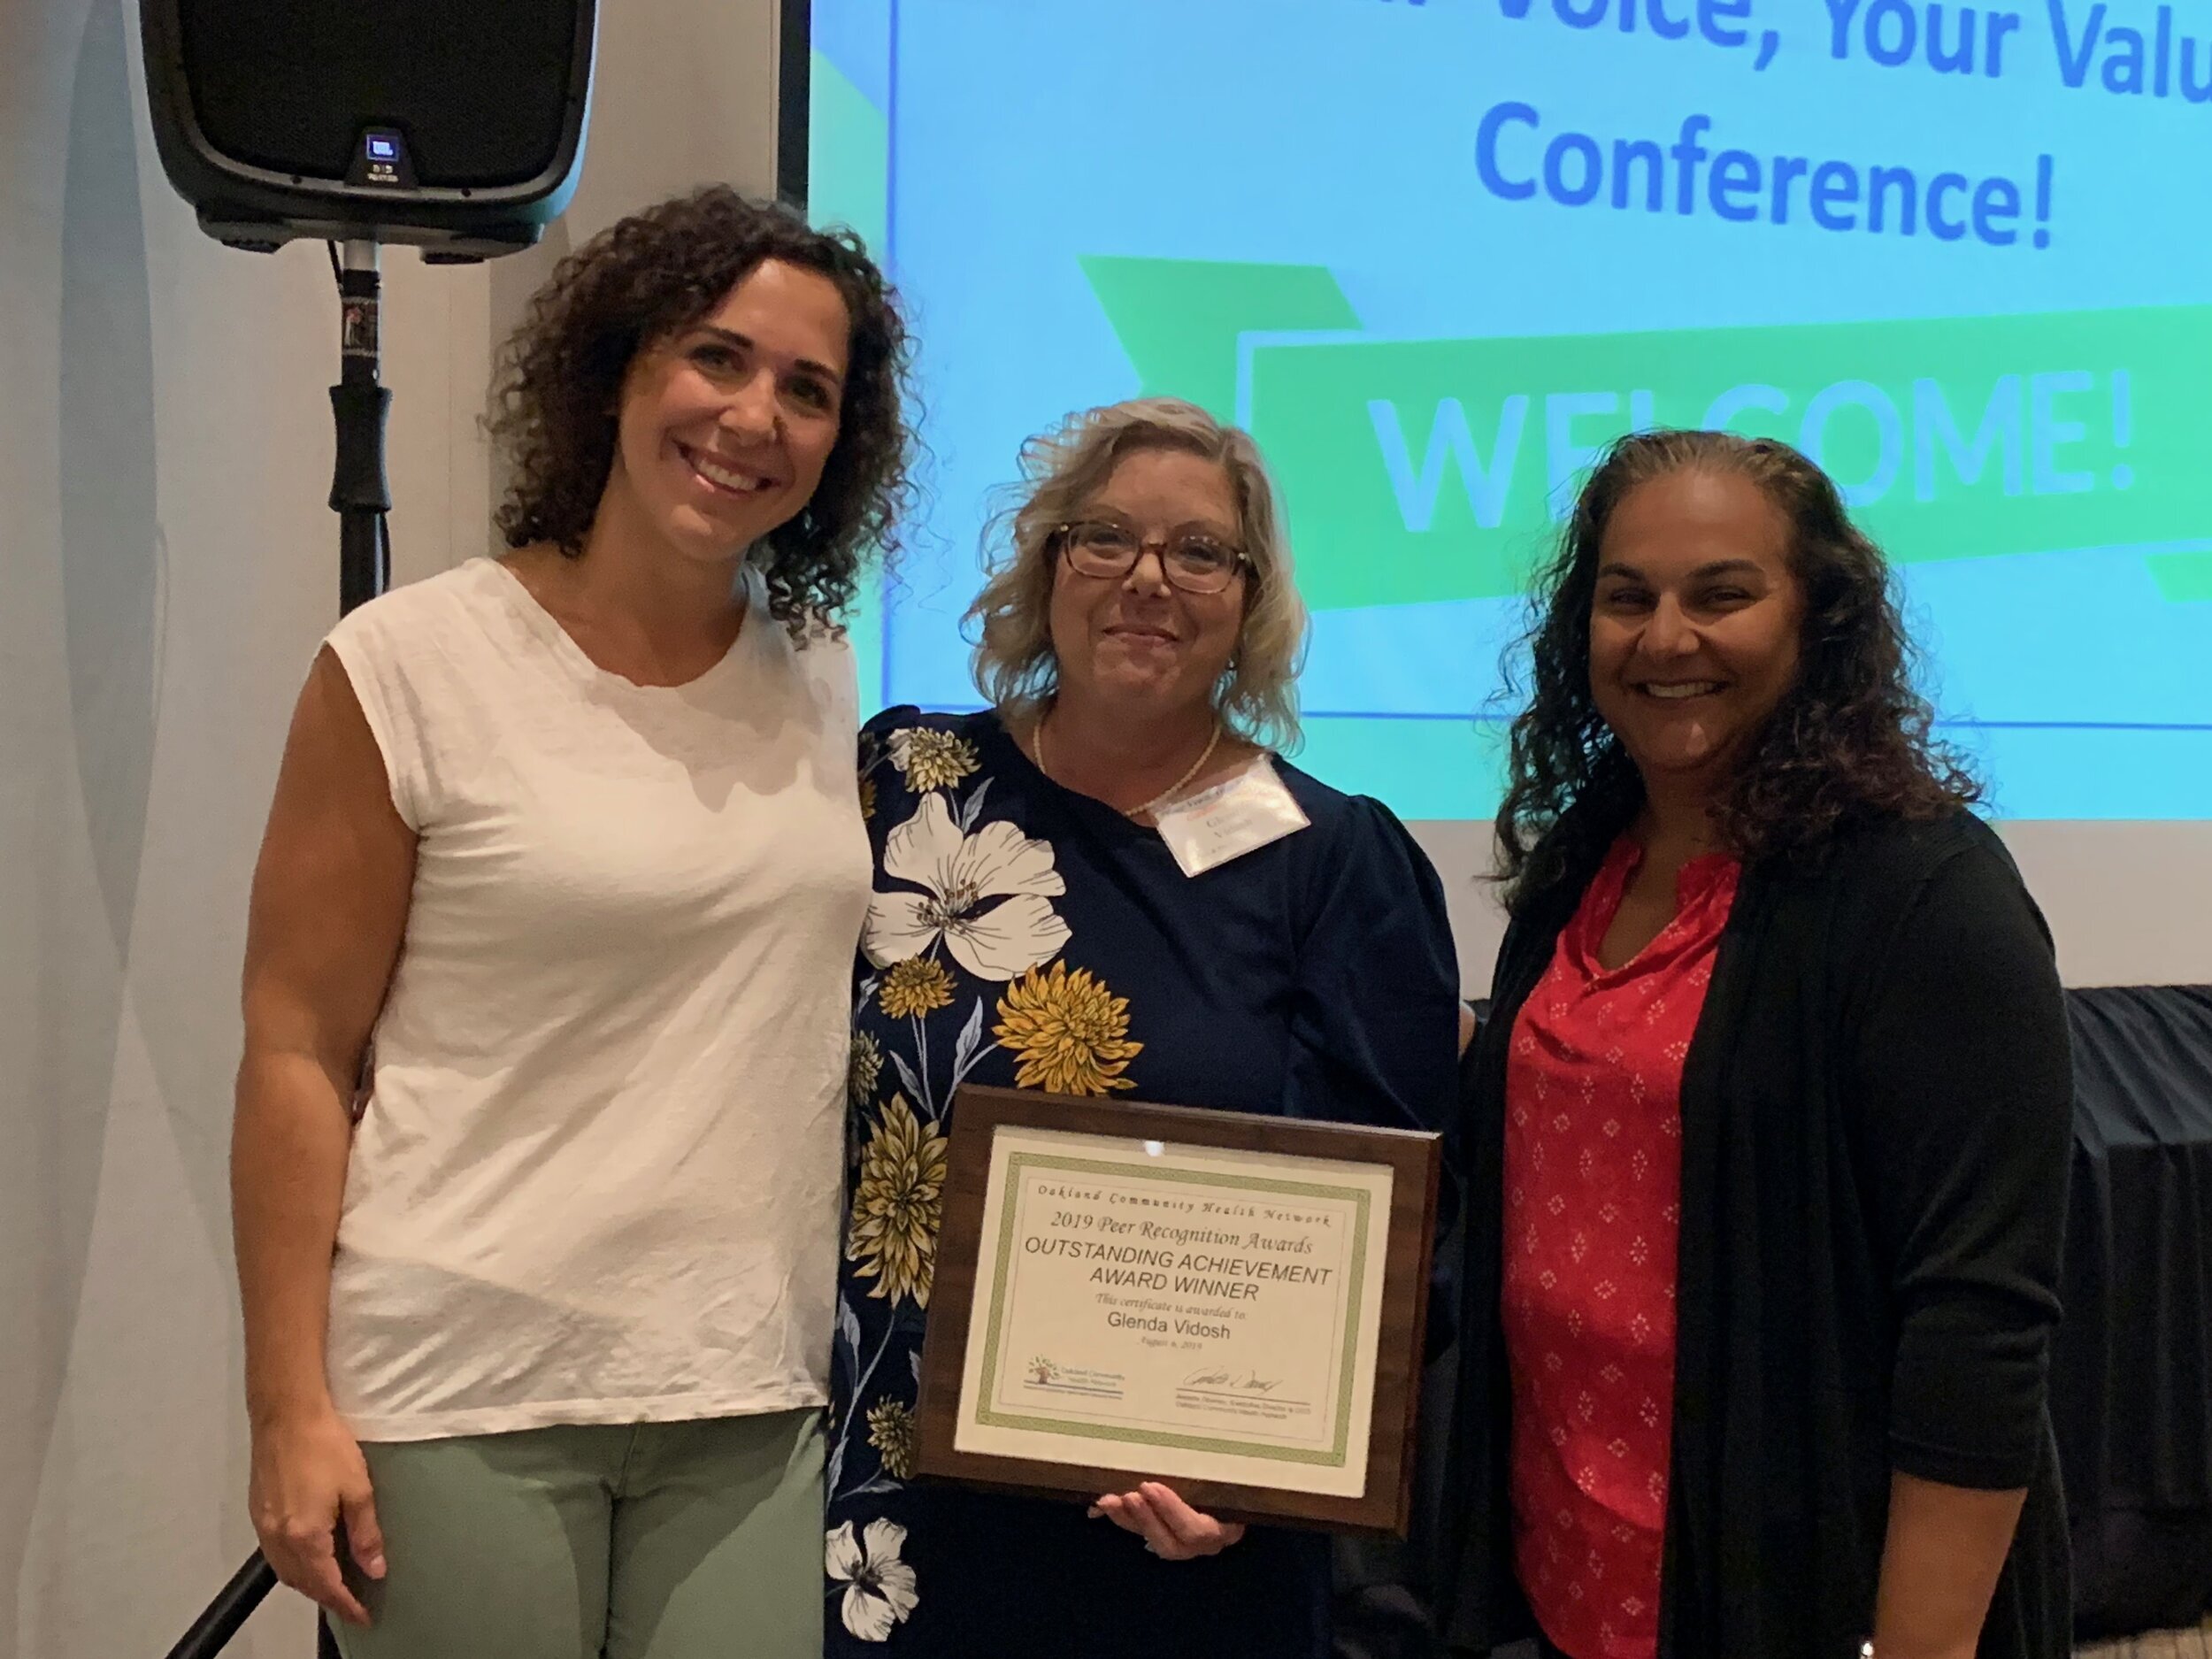  Specialized Services for Youth’s Certified Parent Support Partner/Community Liaison Glenda Vidosh (center) is recongized for her outstanding achievement in peer support at  Oakland Community Health Network’s Your Value, Your Voice conference in 2019